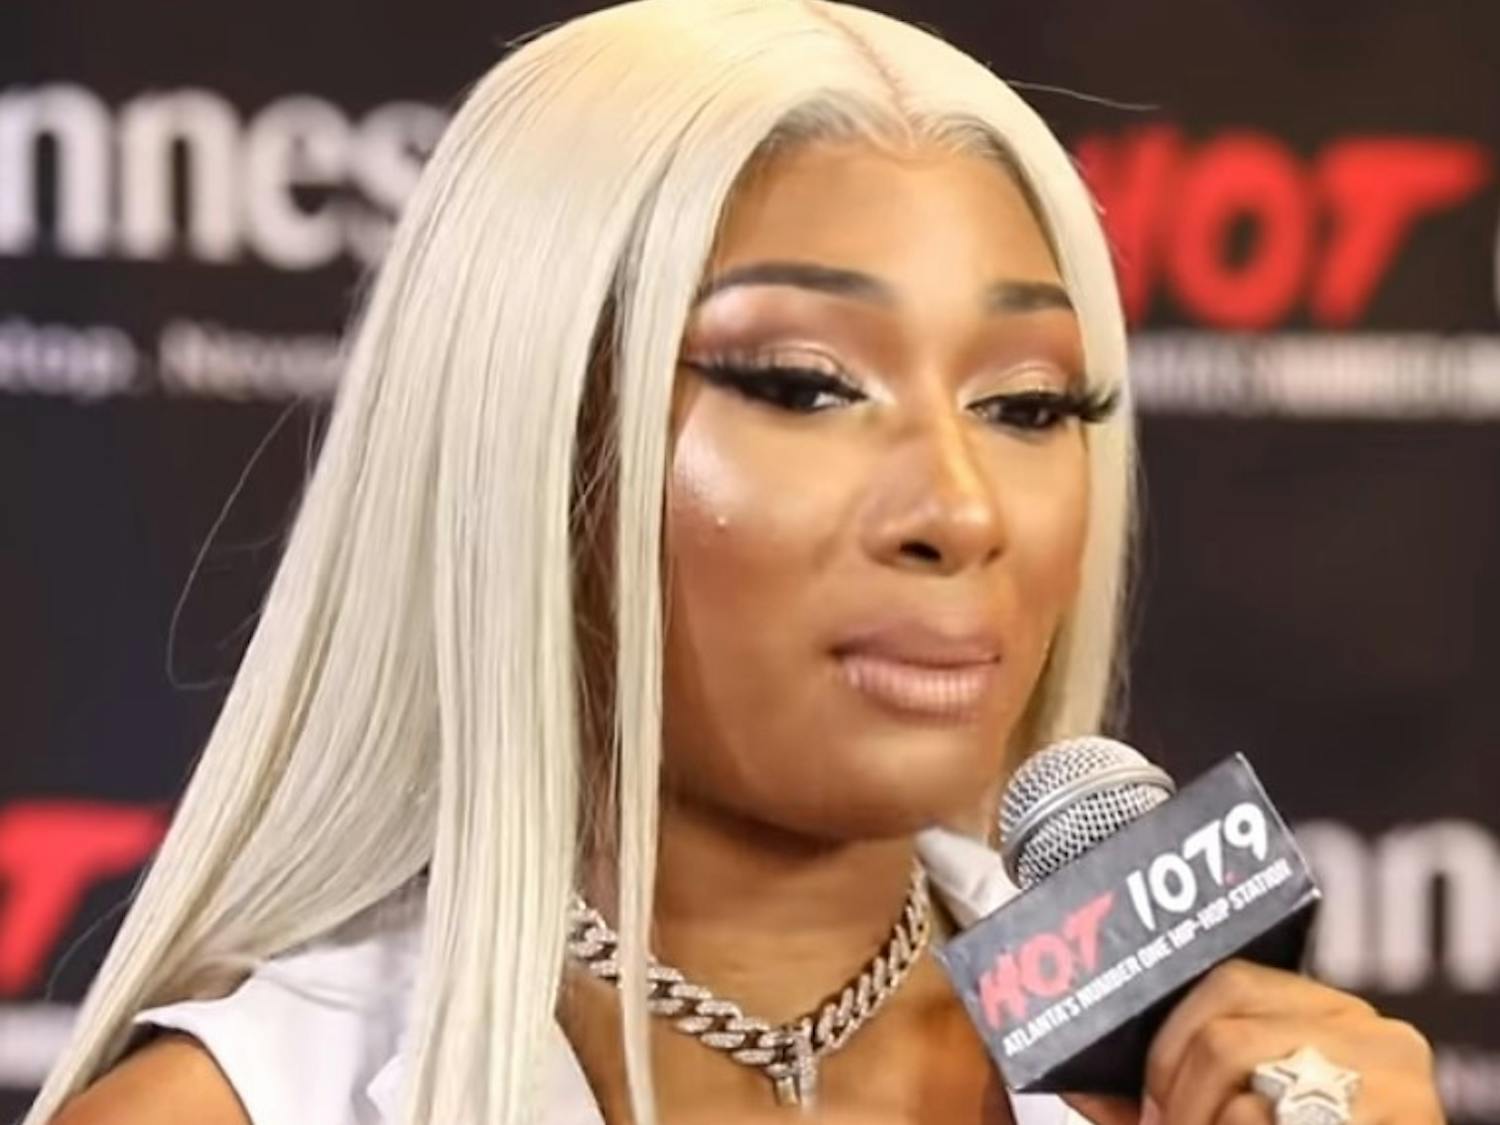 Megan Thee Stallion was the top student choice for Spring Fest this year.